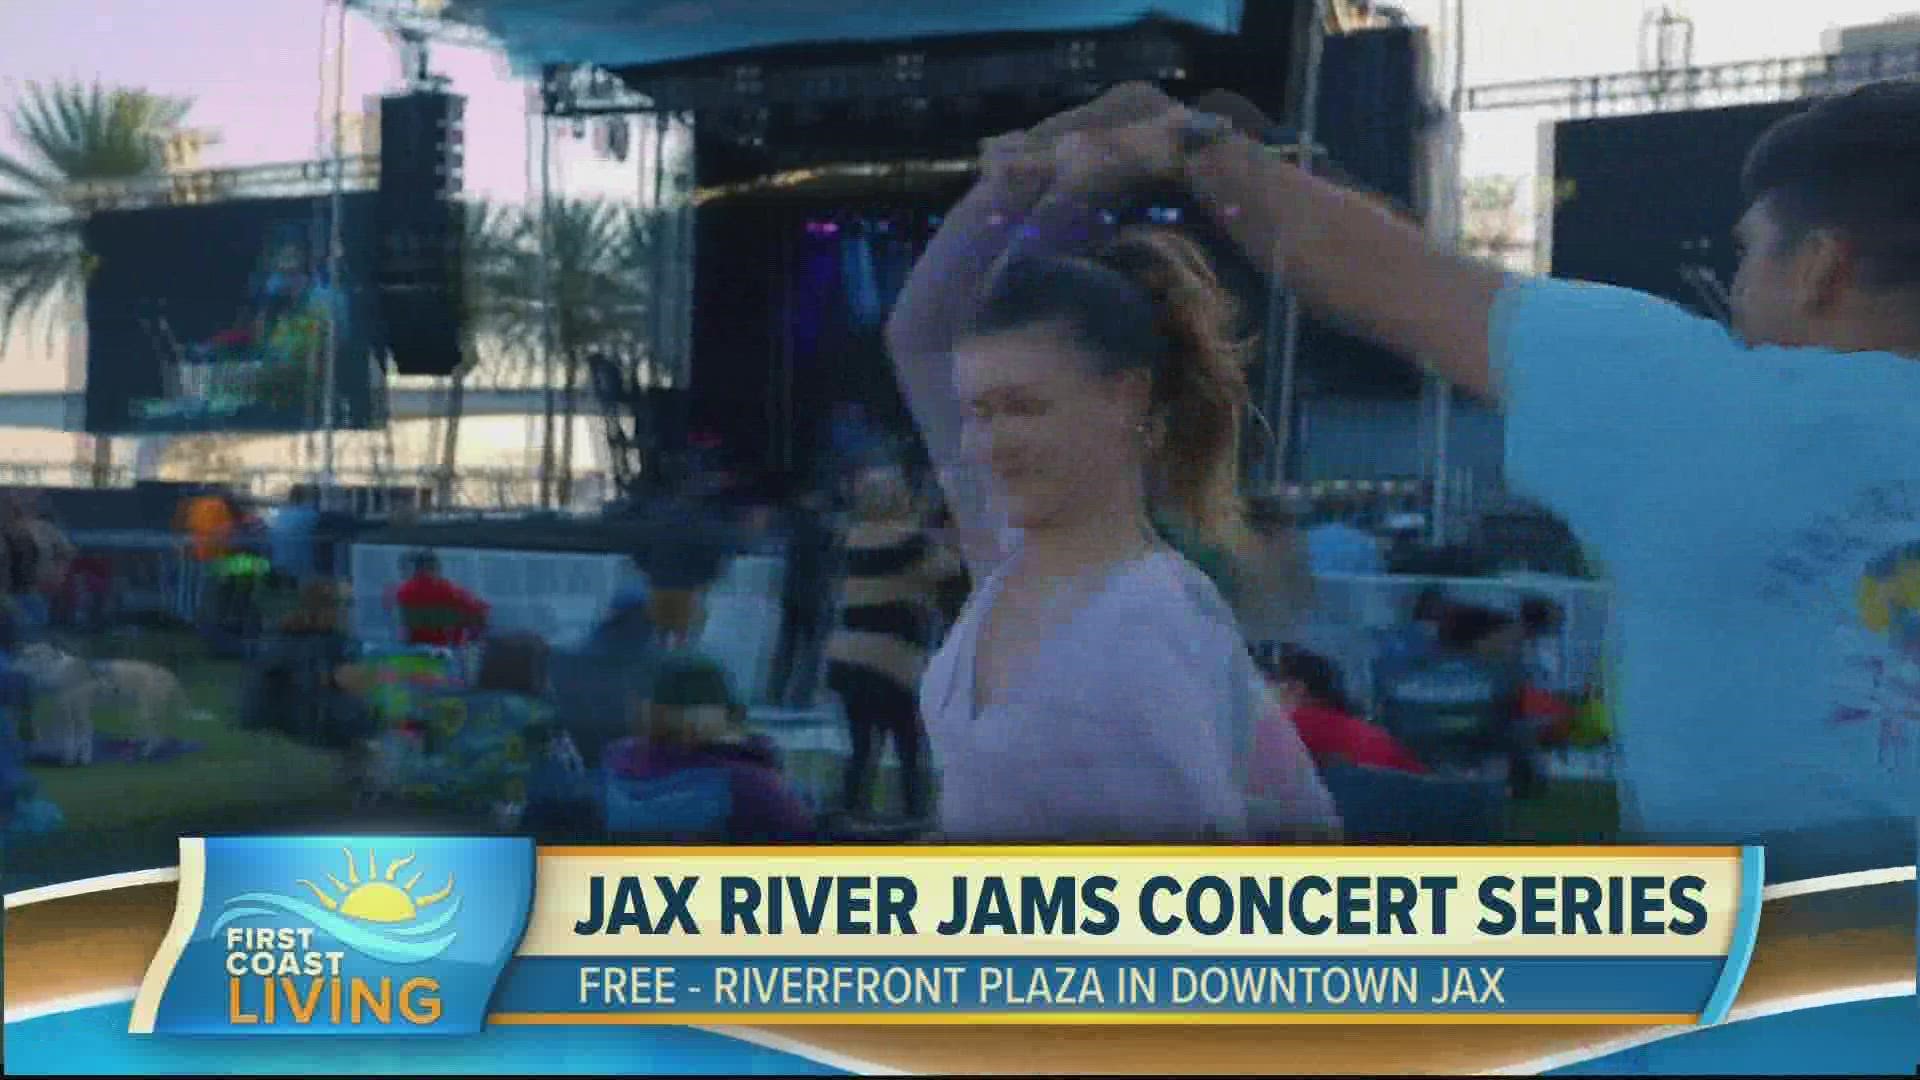 Who doesn't love free live music, food trucks and ice cold beverages?! You can find that and more every Thursday this month at Riverfront Plaza in Downtown Jax!